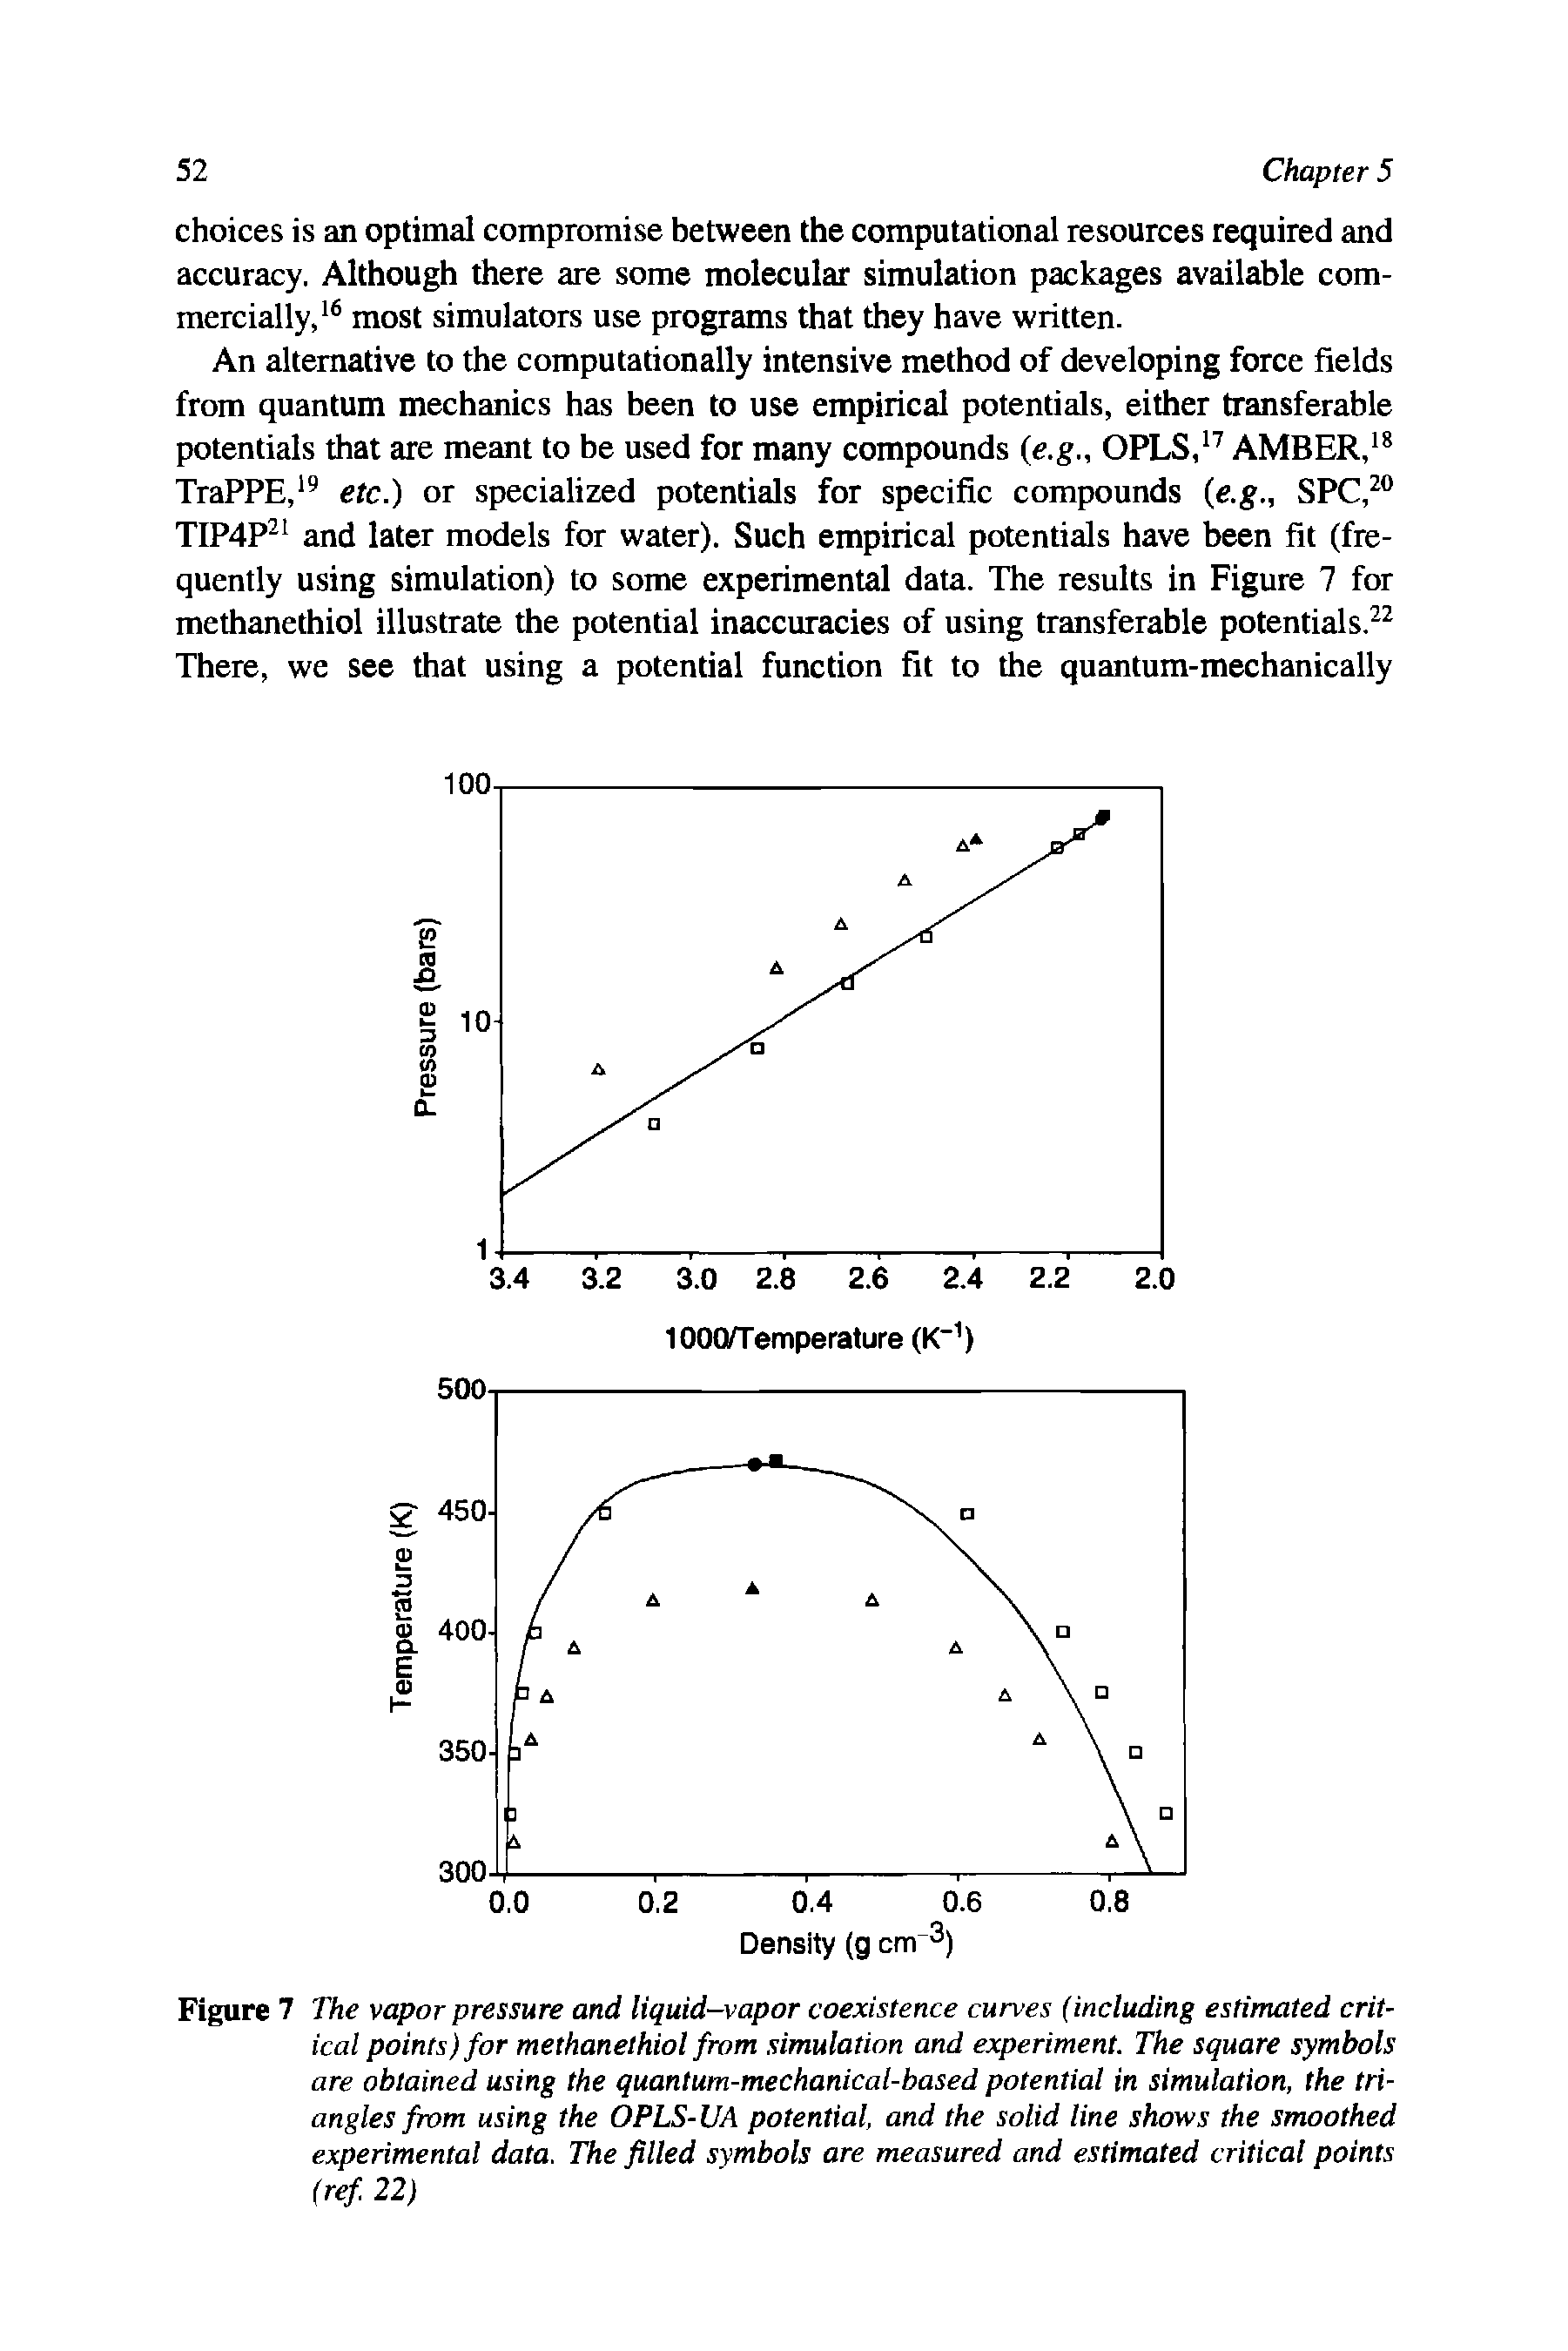 Figure 7 The vapor pressure and liquid-vapor coexistence curves (including estimated critical points) for methanethiol from simulation and experiment. The square symbols are obtained using the quantum-mechanical-based potential in simulation, the triangles from using the OPLS-UA potential, and the solid line shows the smoothed experimental data. The filled symbols are measured and estimated critical points (ref 22)...